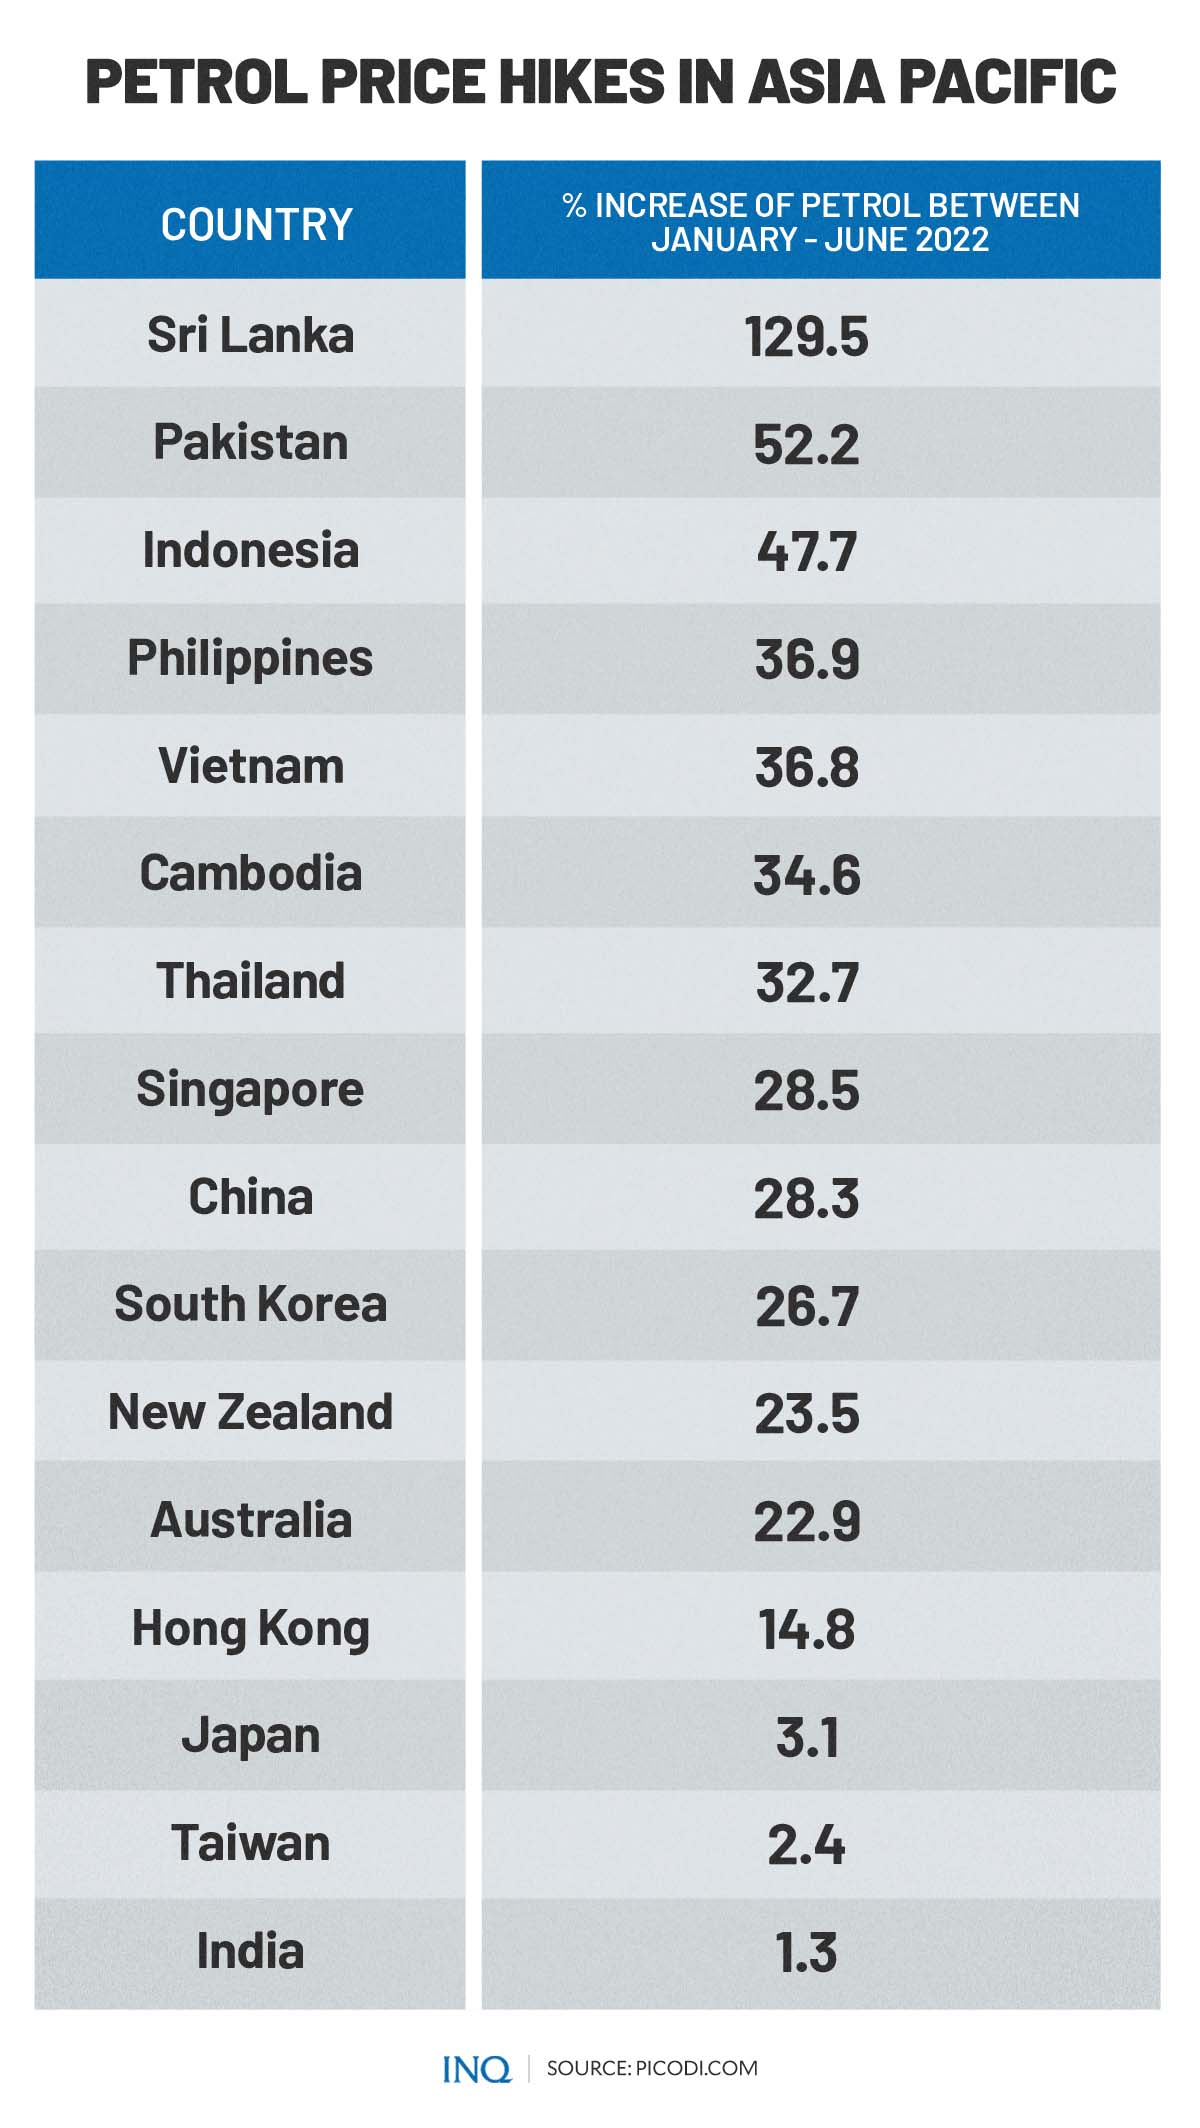 Petrol price hikes in Asia Pacific